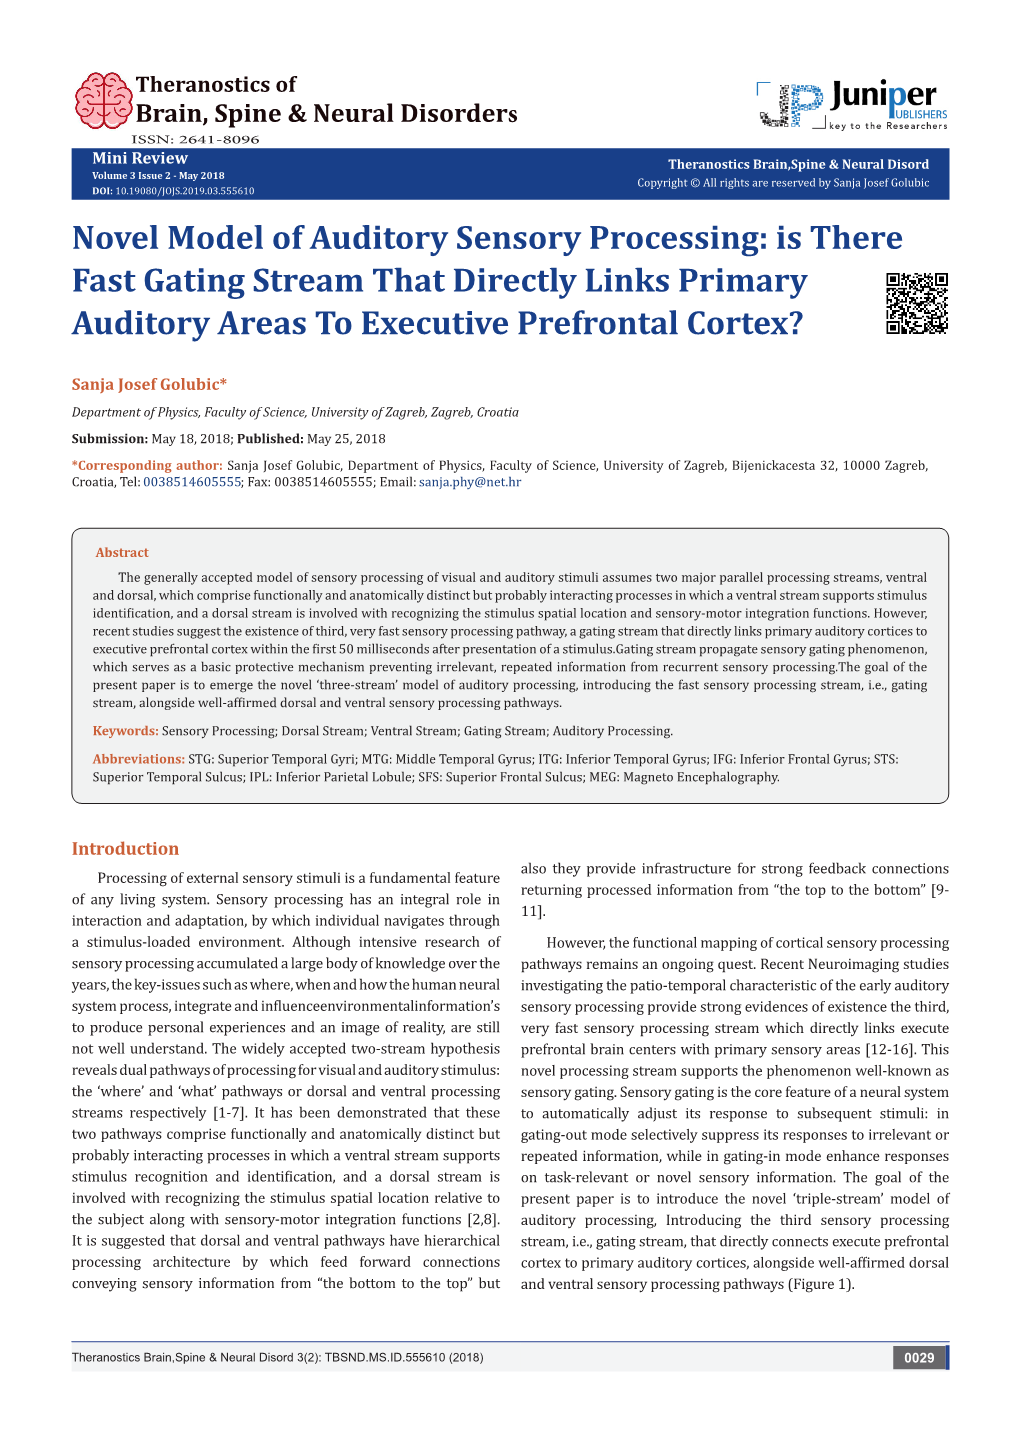 Novel Model of Auditory Sensory Processing: Is There Fast Gating Stream That Directly Links Primary Auditory Areas to Executive Prefrontal Cortex?